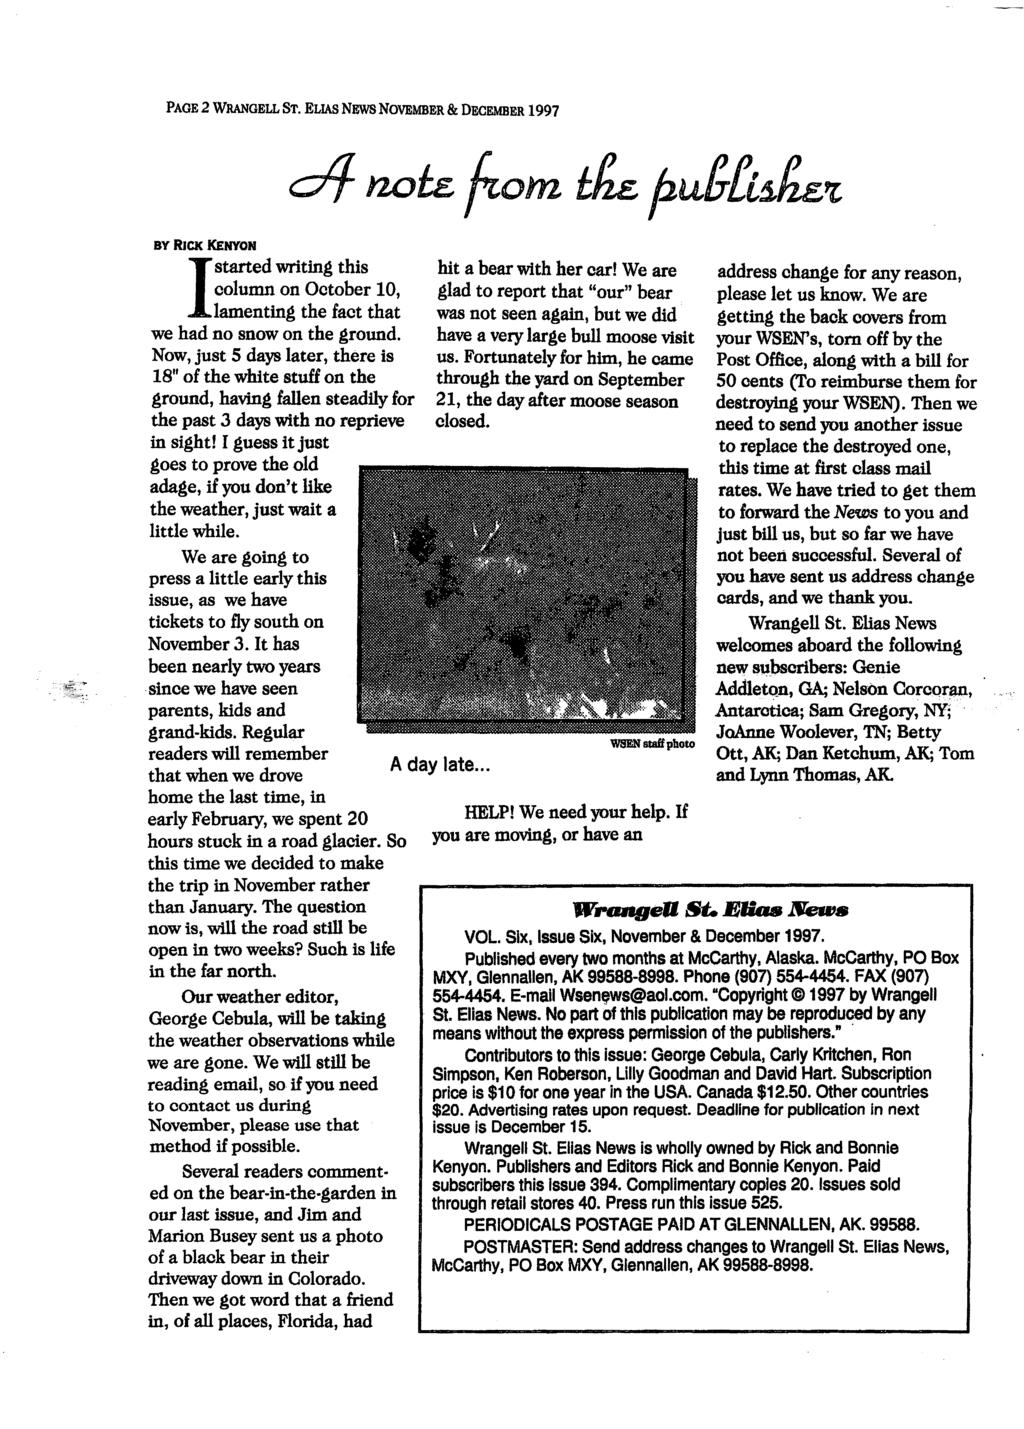 PAGE 2 WRANGELL ST. ELIAS NEWS NOVEMBER & DECEMBER 1997 BY RICK KENYON!started writing this column on October 10, lamenting the fact that we had no snow on the ground.